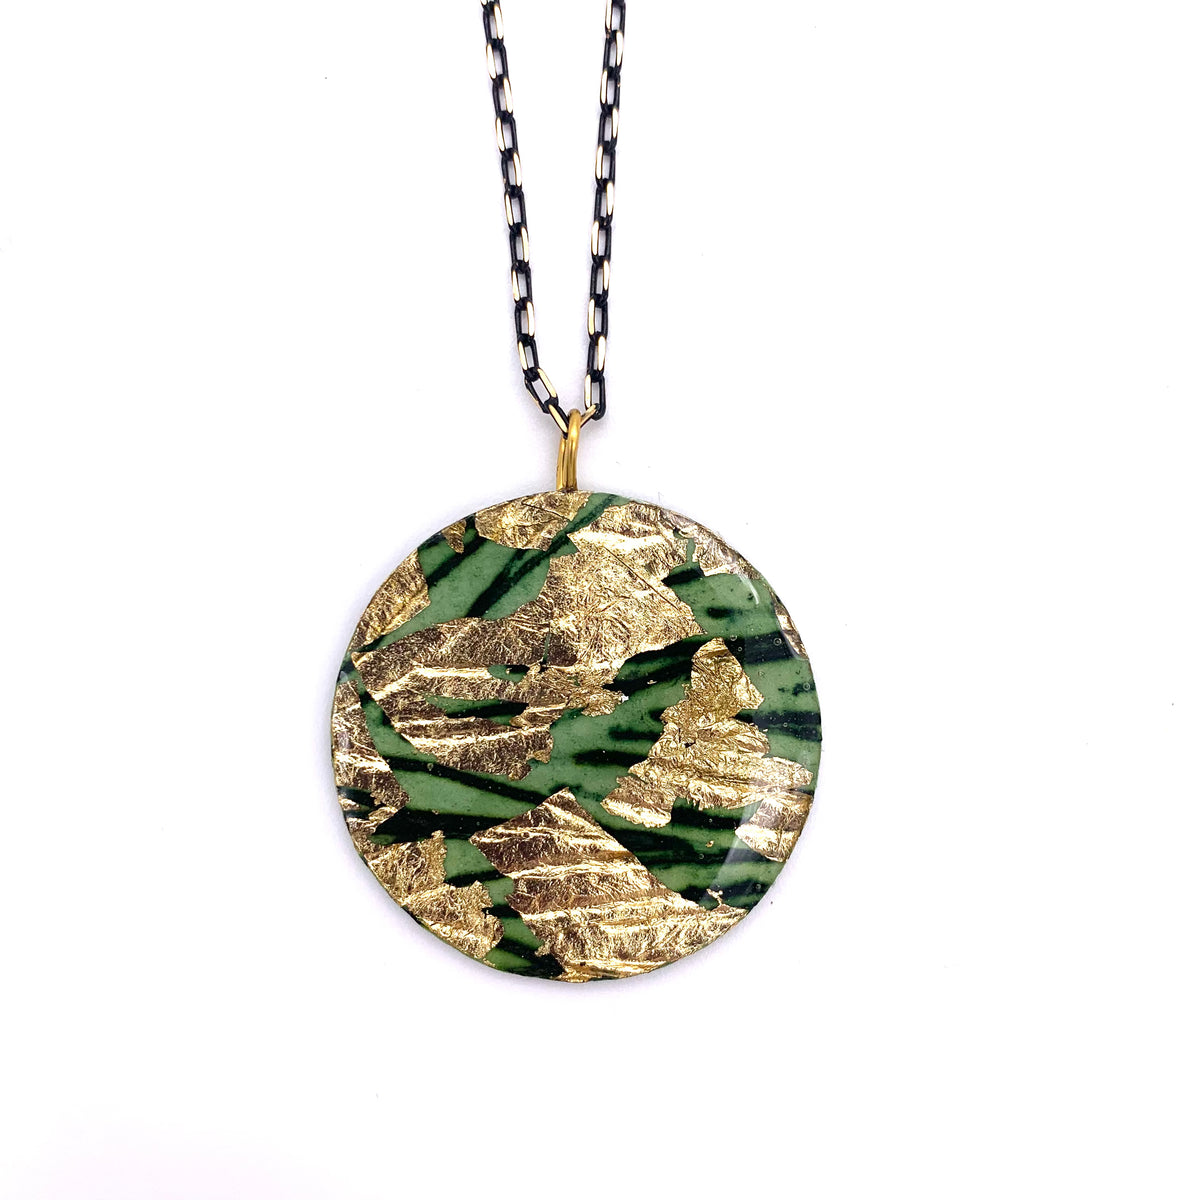 Ró sgraffito necklace in forest/gold